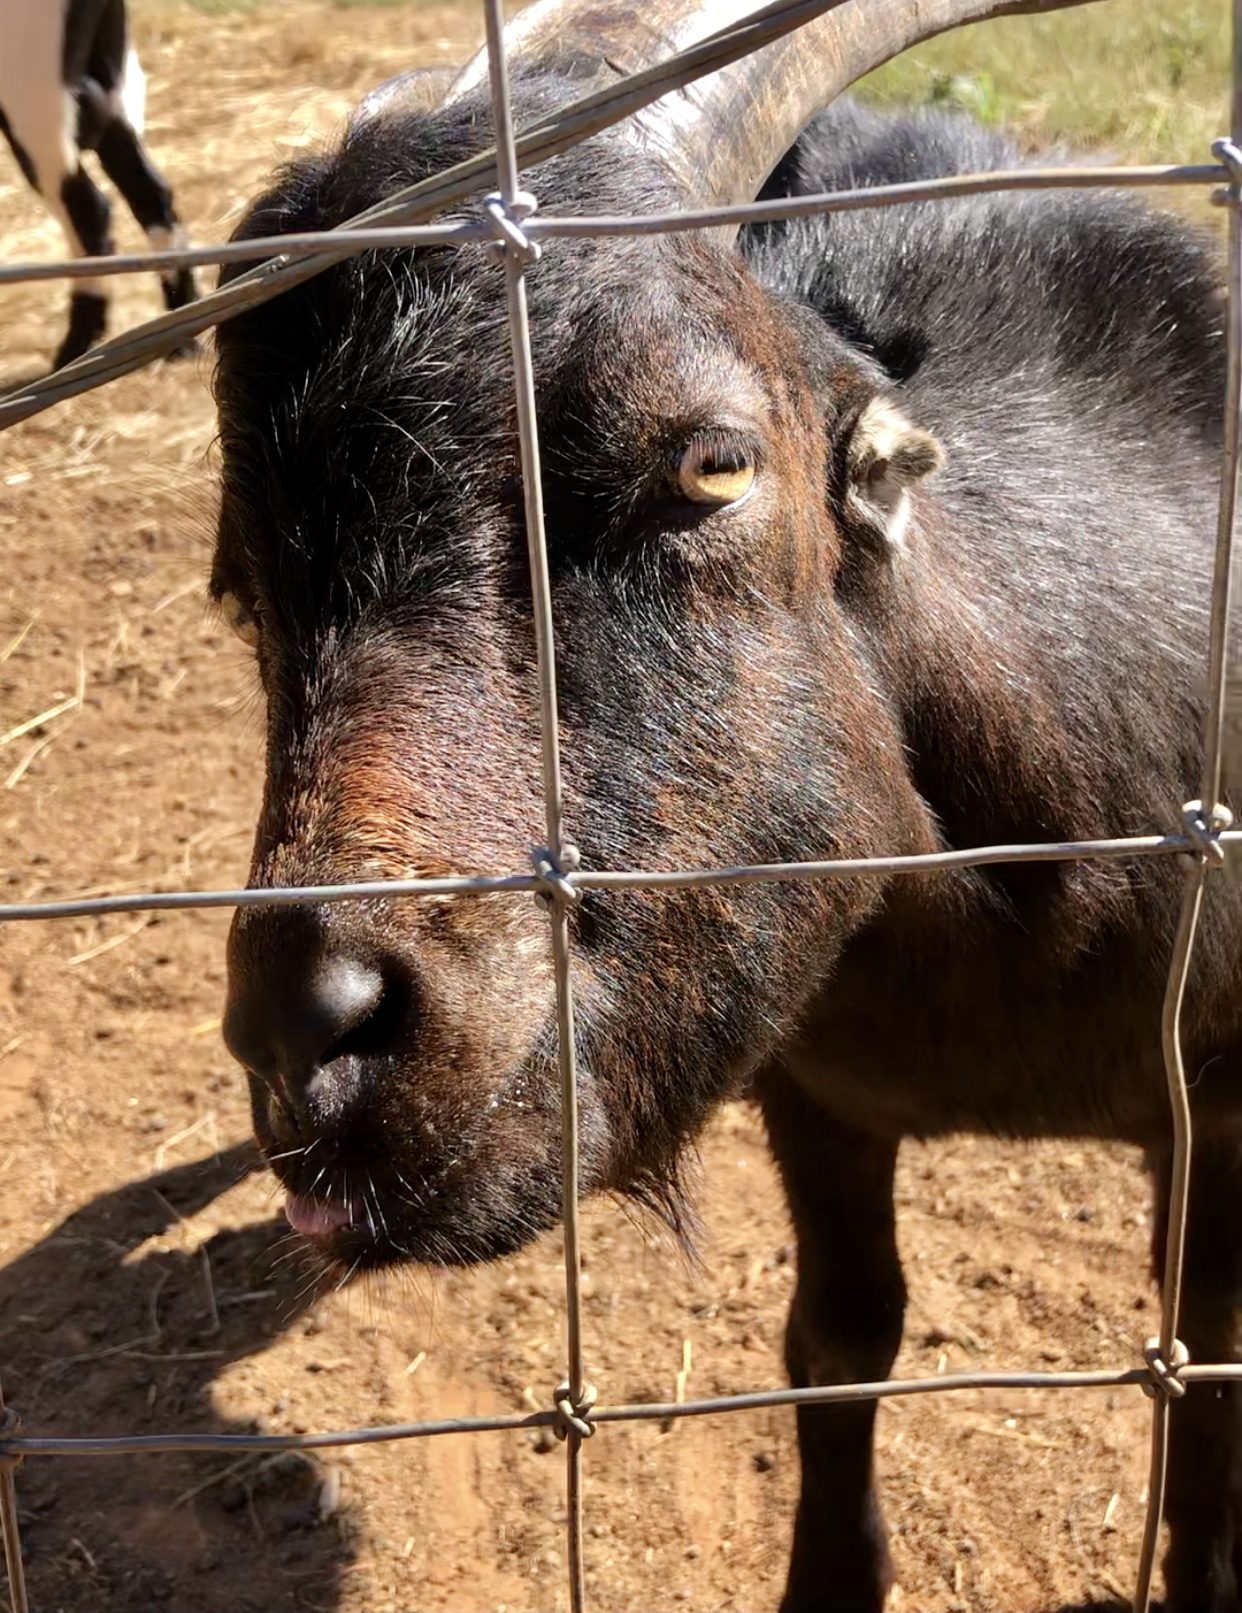 goat with coat fading from black to brown